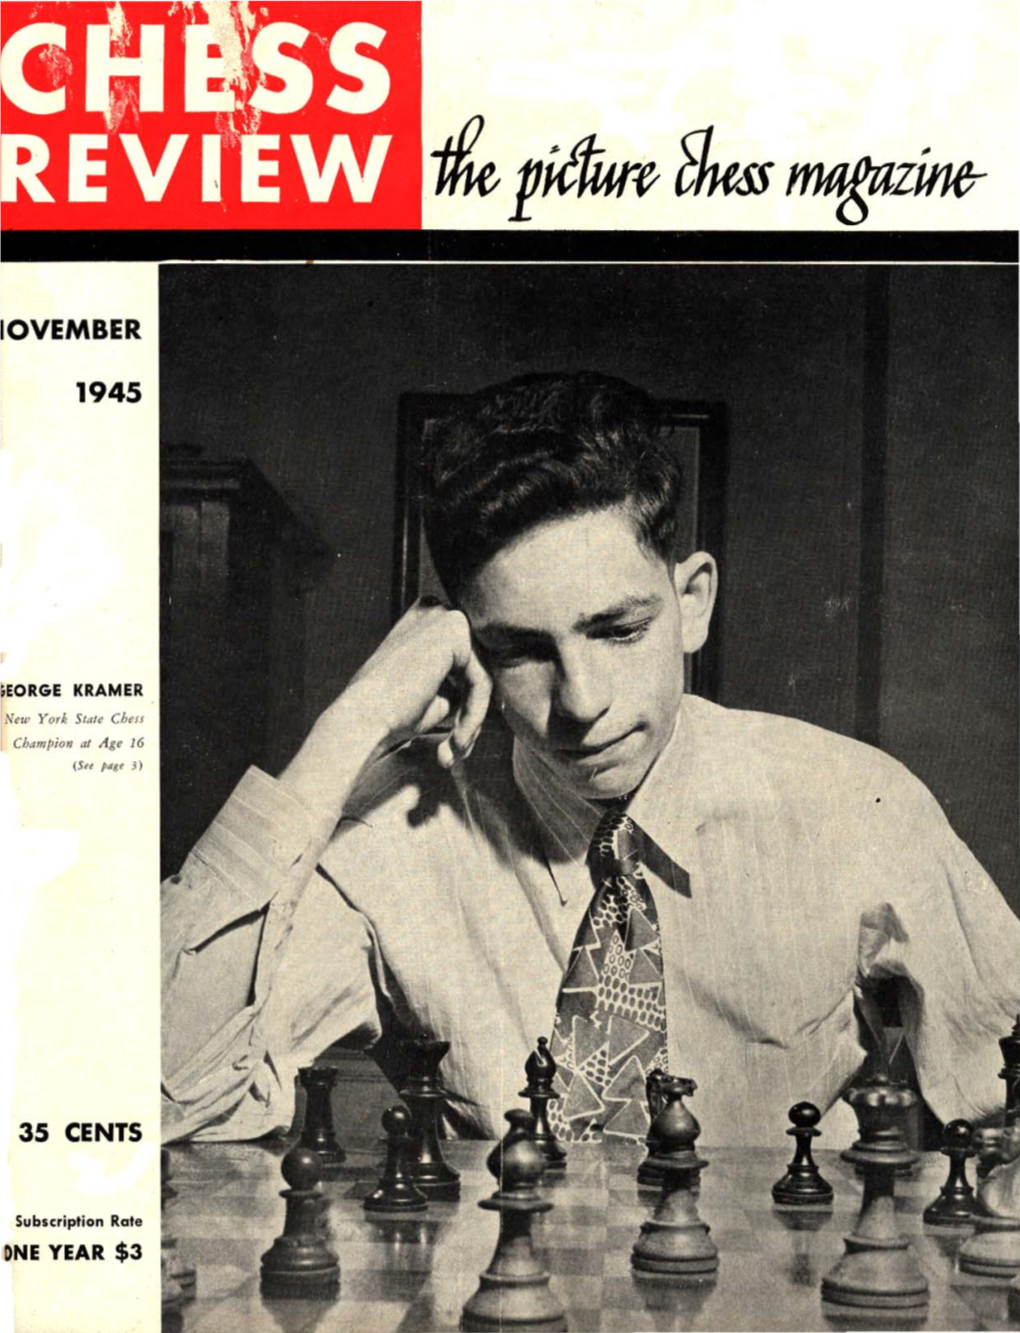 CHESS REVIEW, NEW YORK Sible